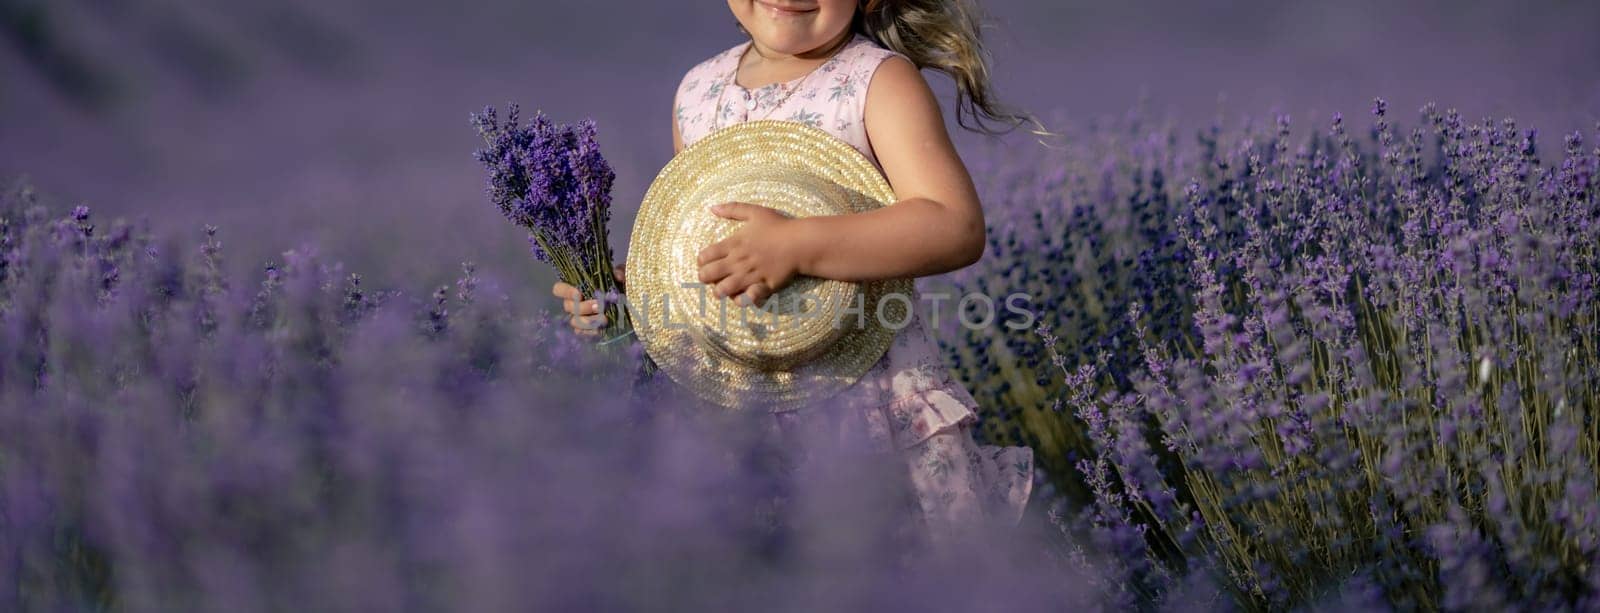 girl lavender field banner in a pink dress holds a bouquet of lavender on a lilac field. Aromatherapy concept, lavender oil, photo shoot in lavender.